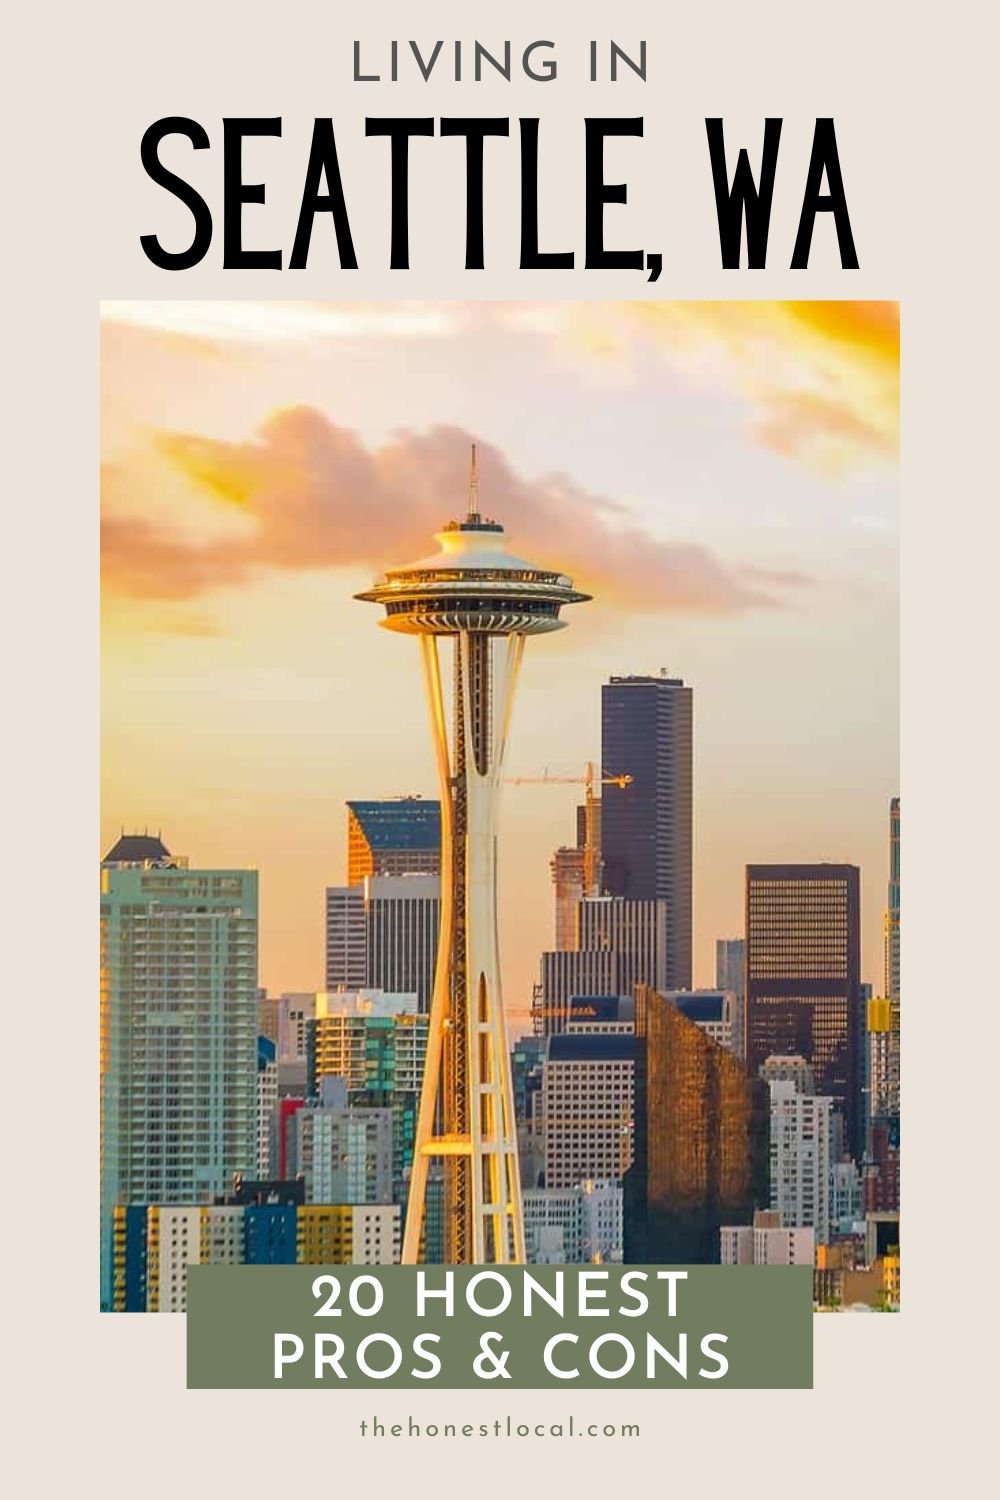 Pros and cons of moving to Seattle, Washington